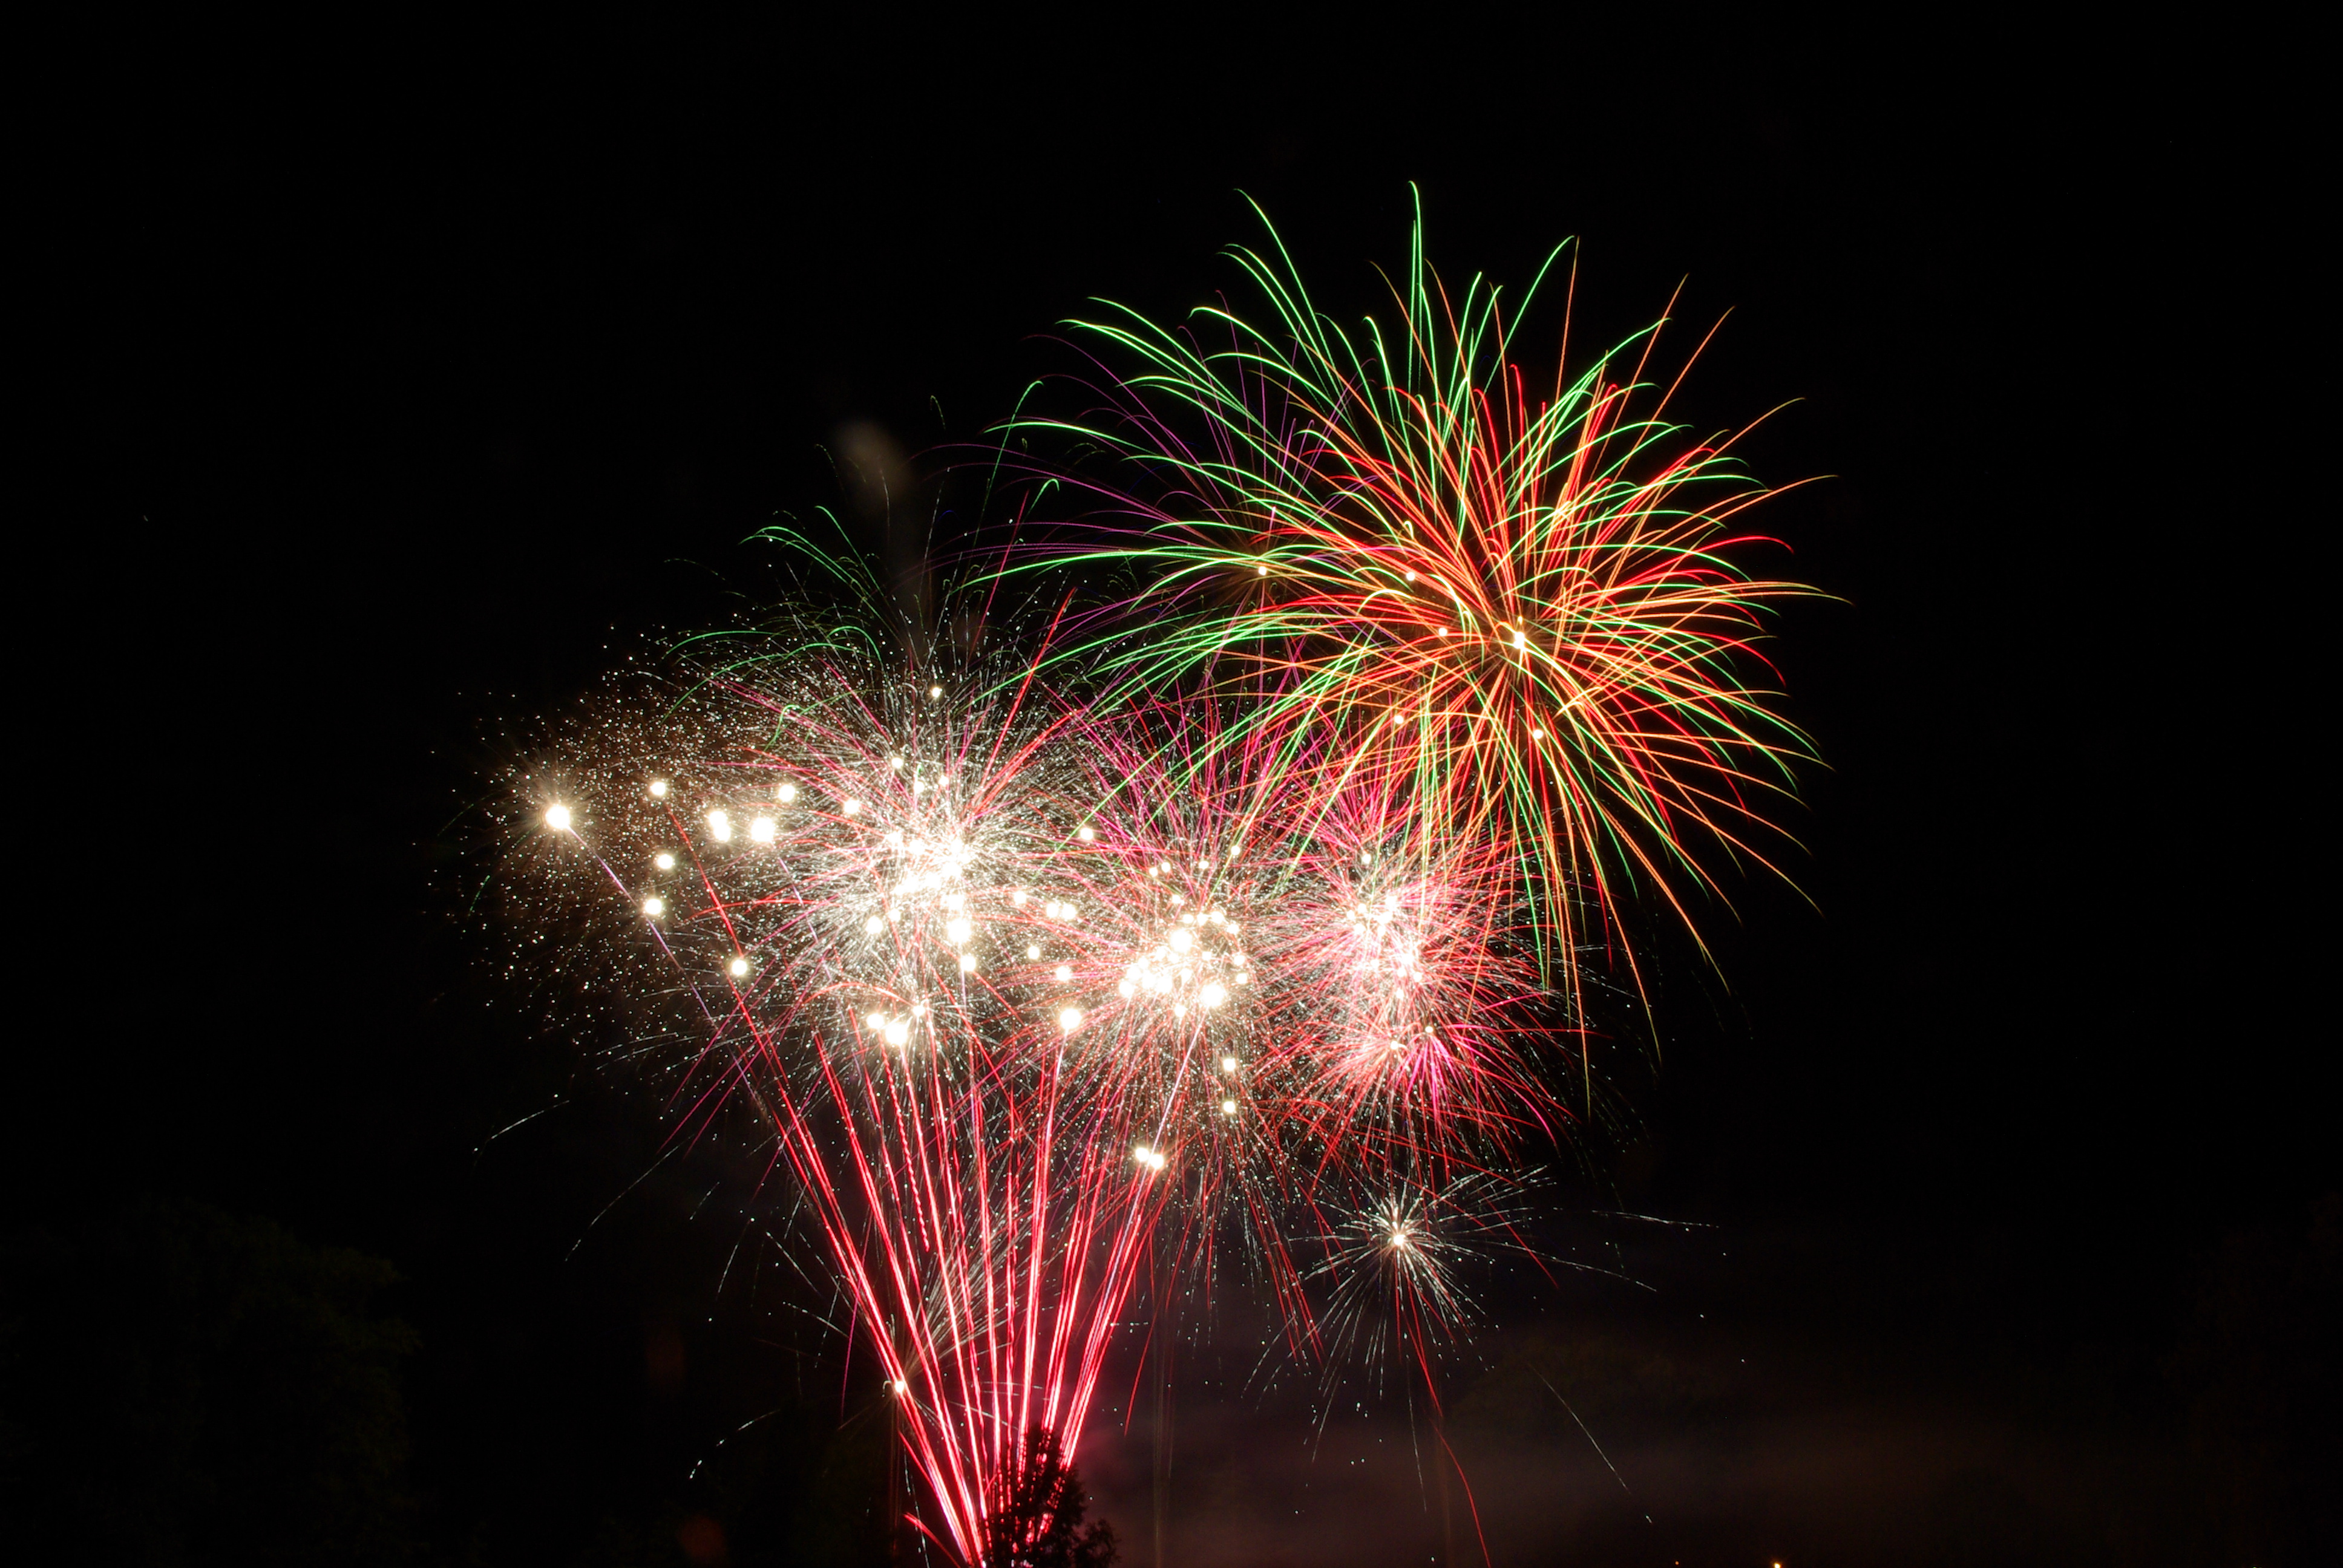 motley, firework, salute, holidays, sparks, multicolored, holiday, fireworks cellphone